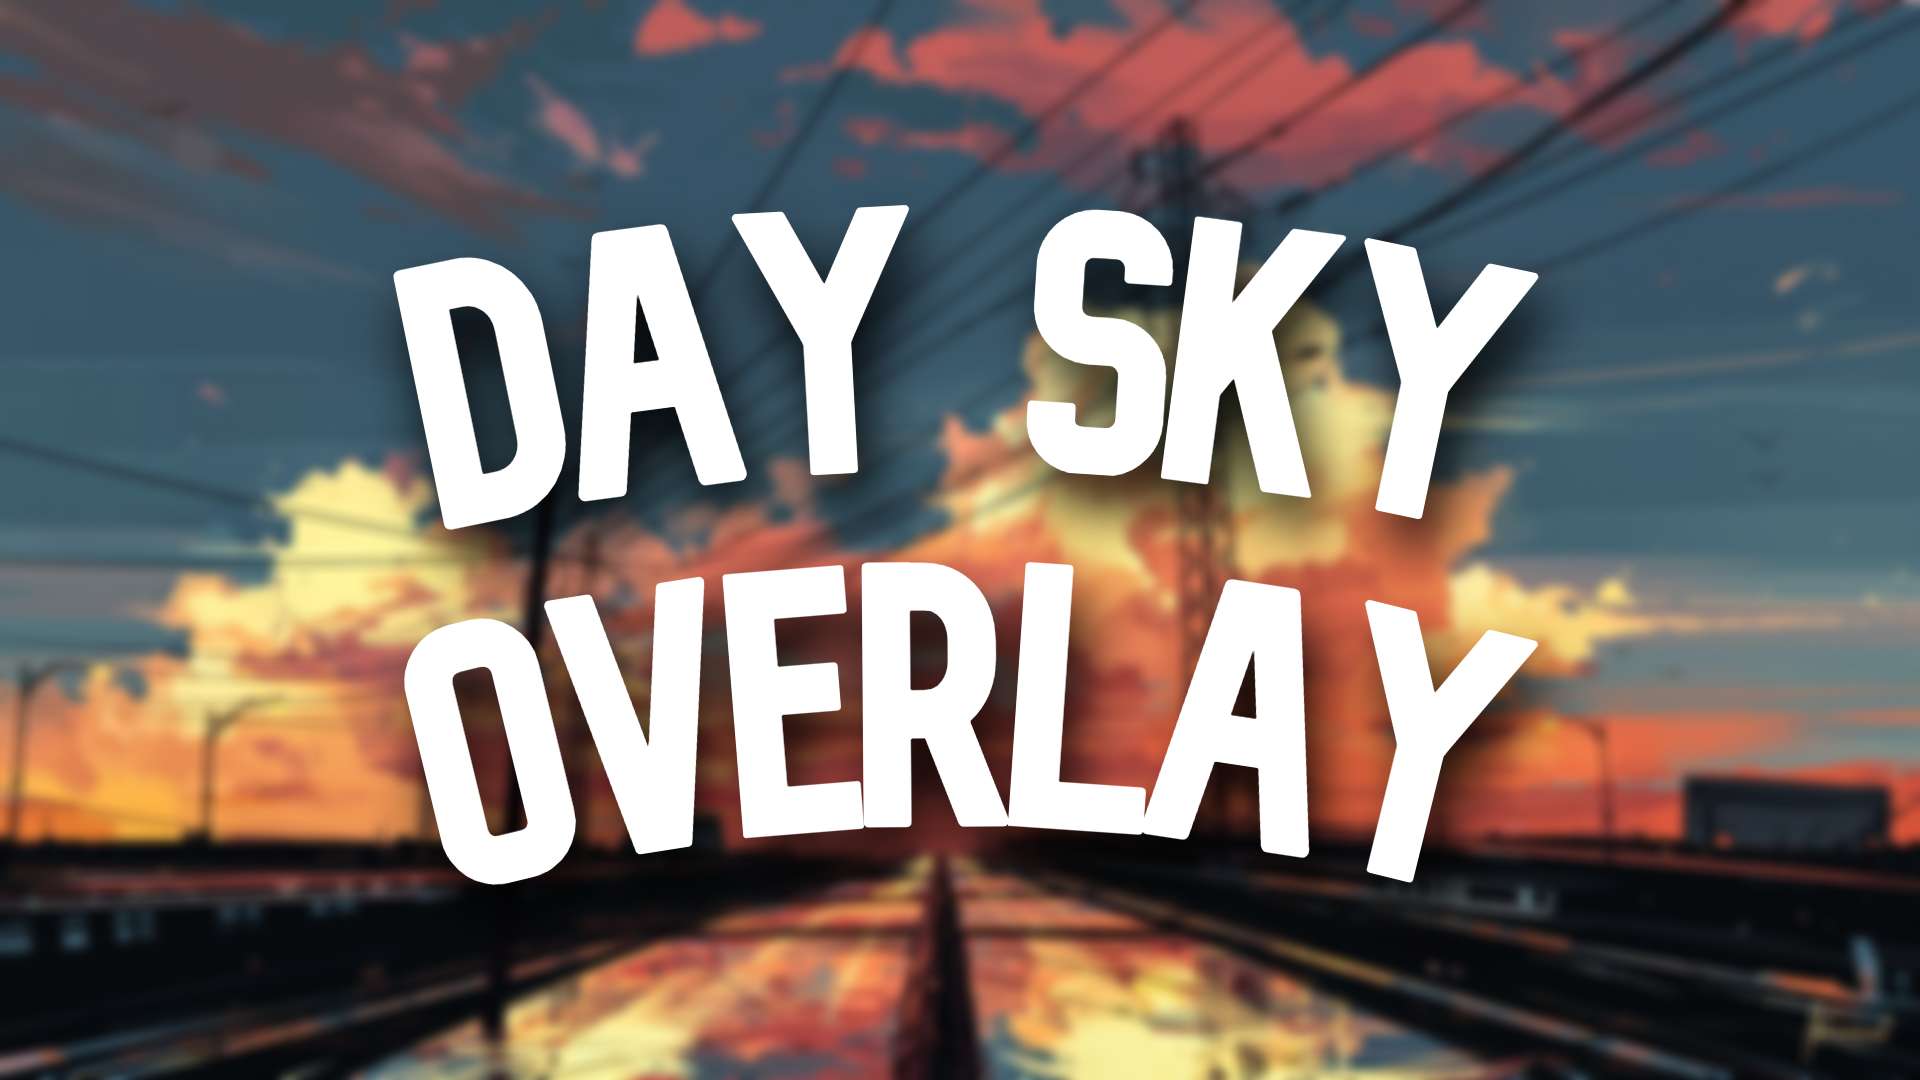 Day Sky Overlay #13 16 by rh56 on PvPRP